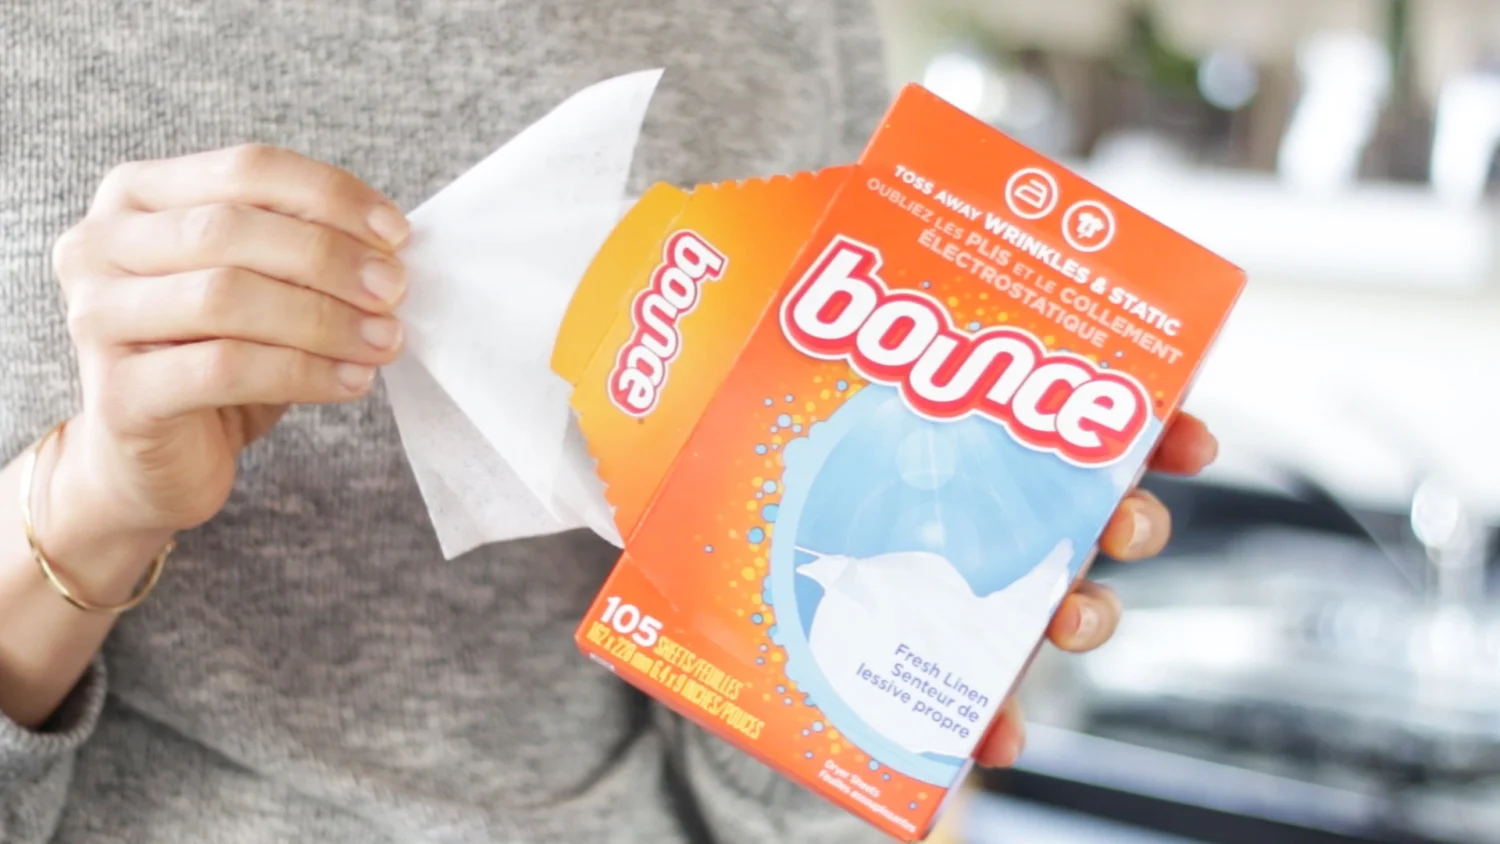 The 8 Best Dryer Sheets of 2023